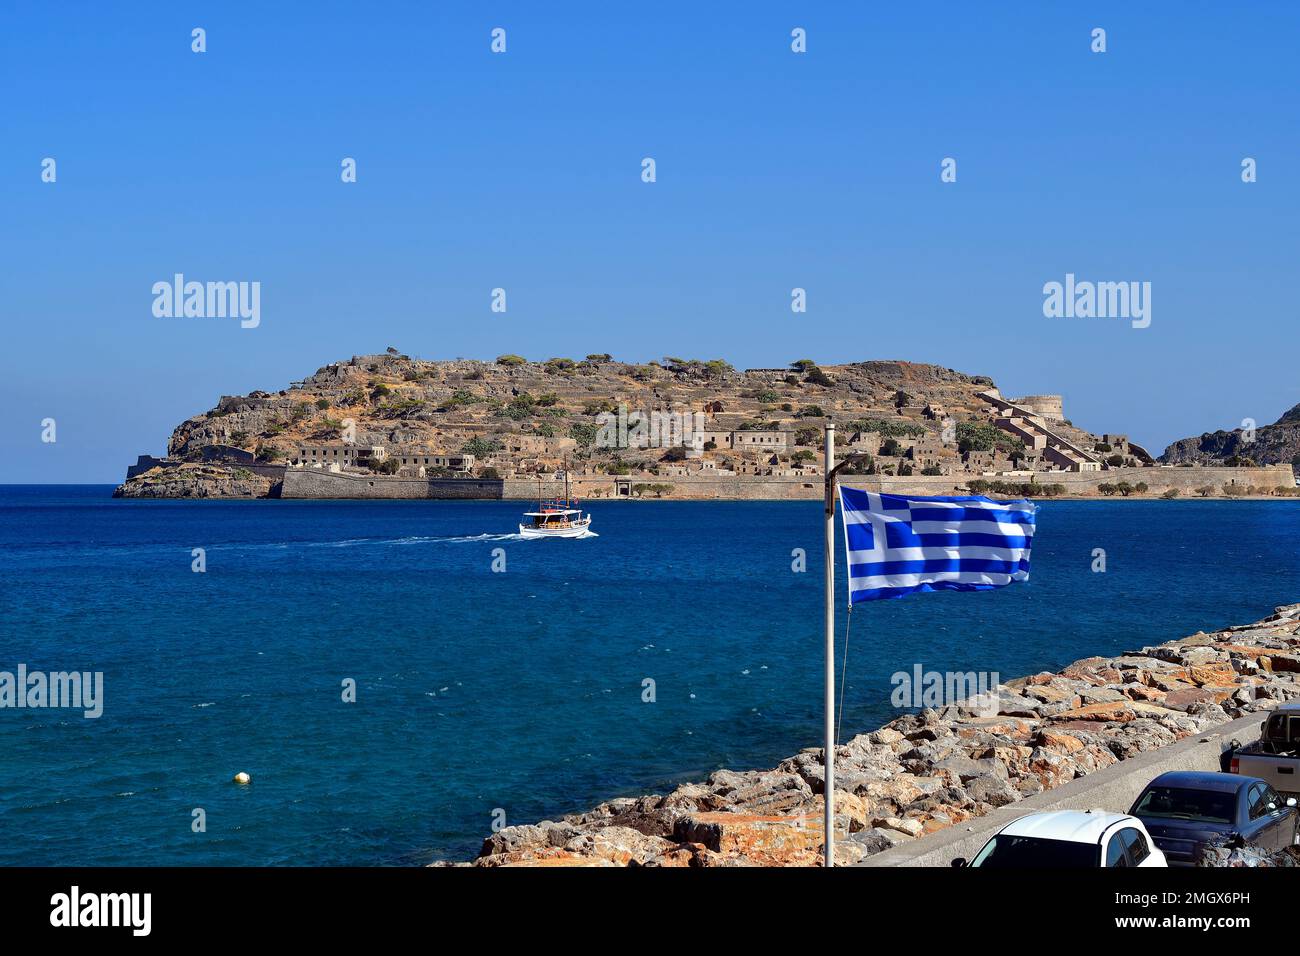 Greece, Crete, buildings built of stone in old Venetian Fortress Spinalonga, until 1957 used as a leper station, now a popular tourist destination Stock Photo